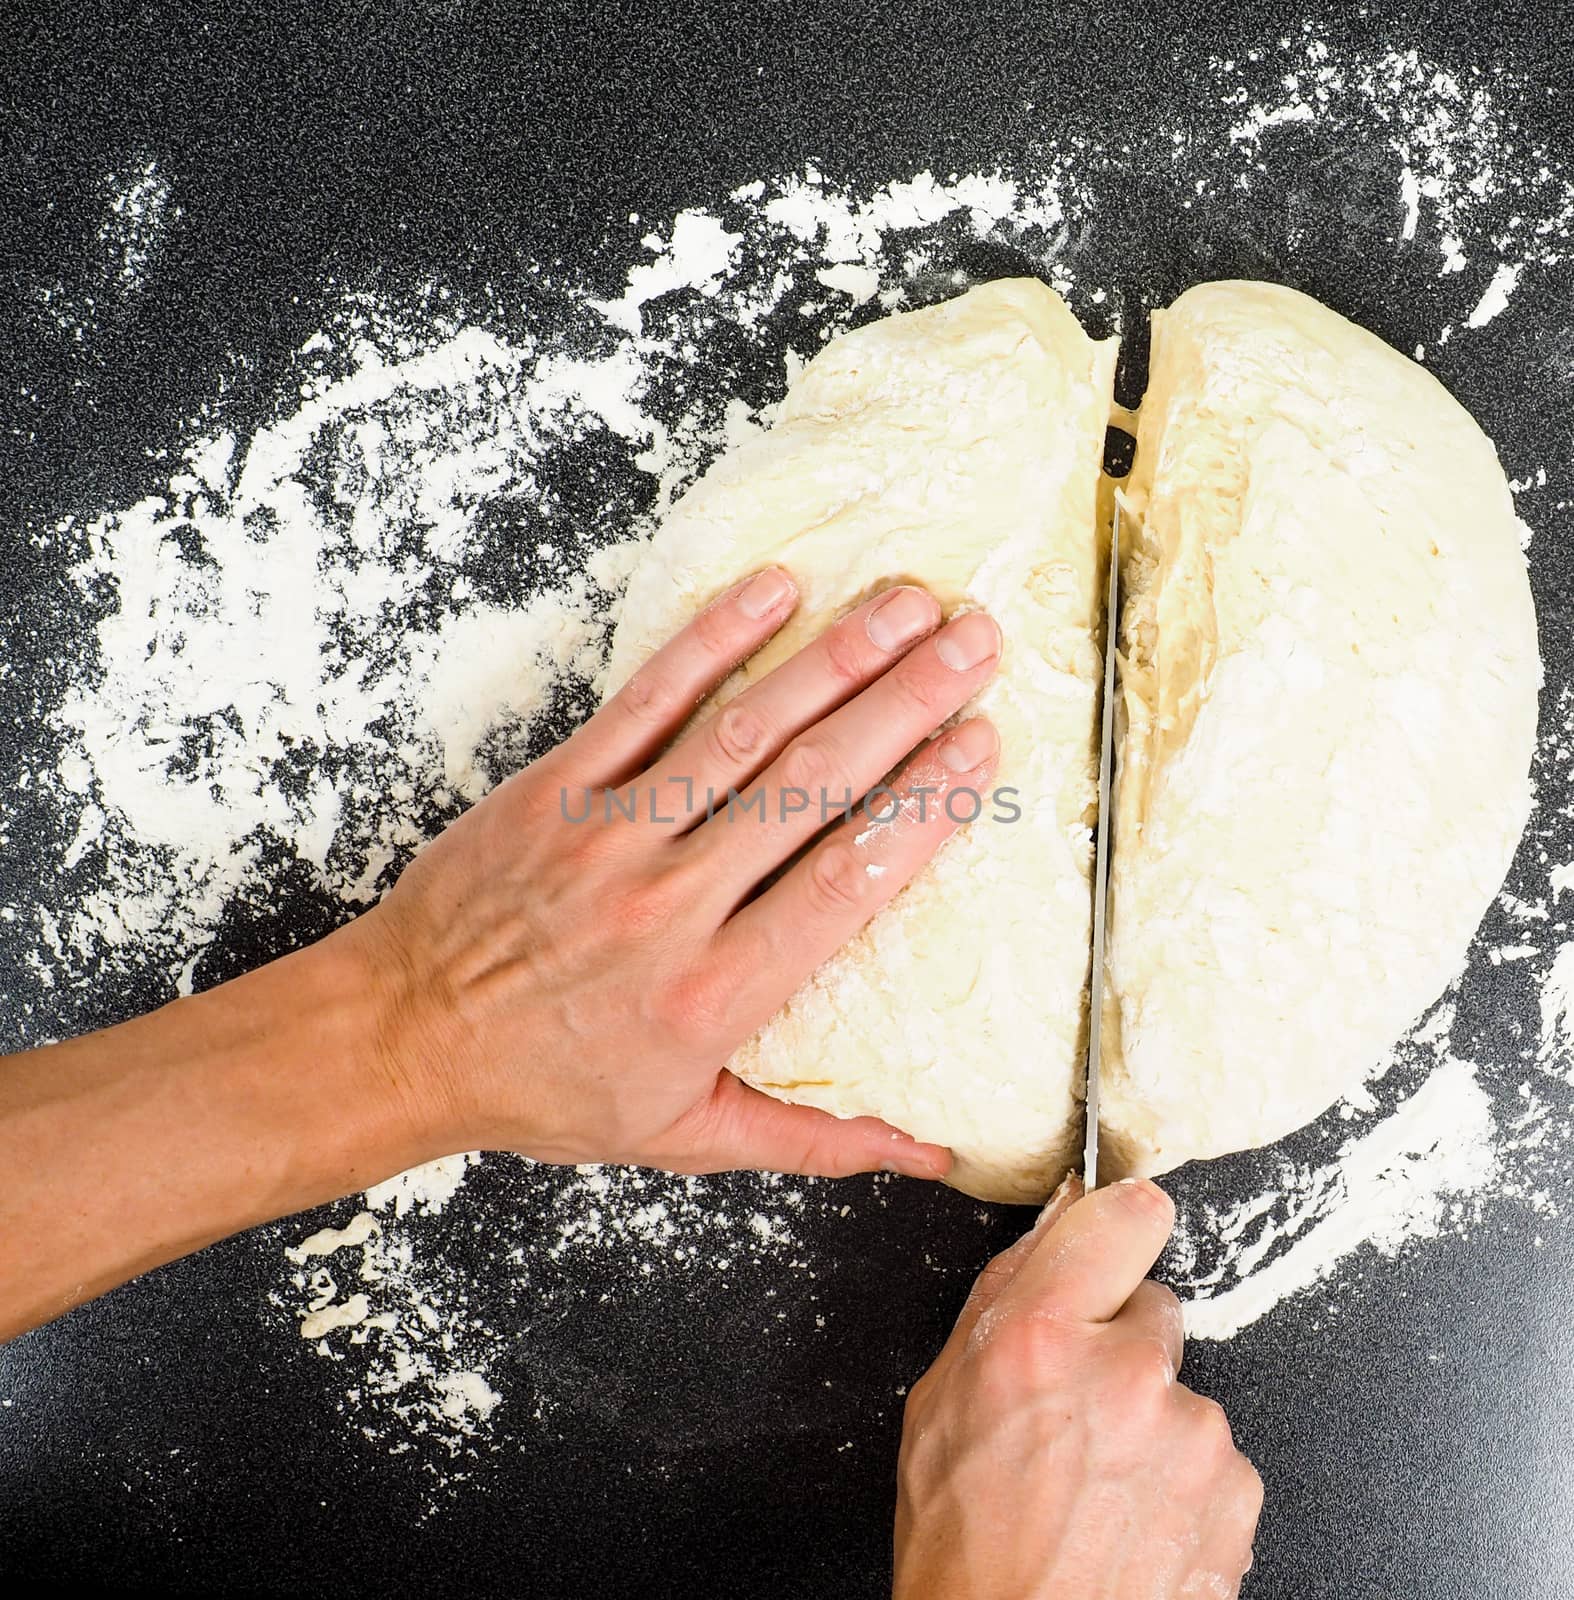 Hands cutting a lump of dough into two pieaces on black table with flour spread